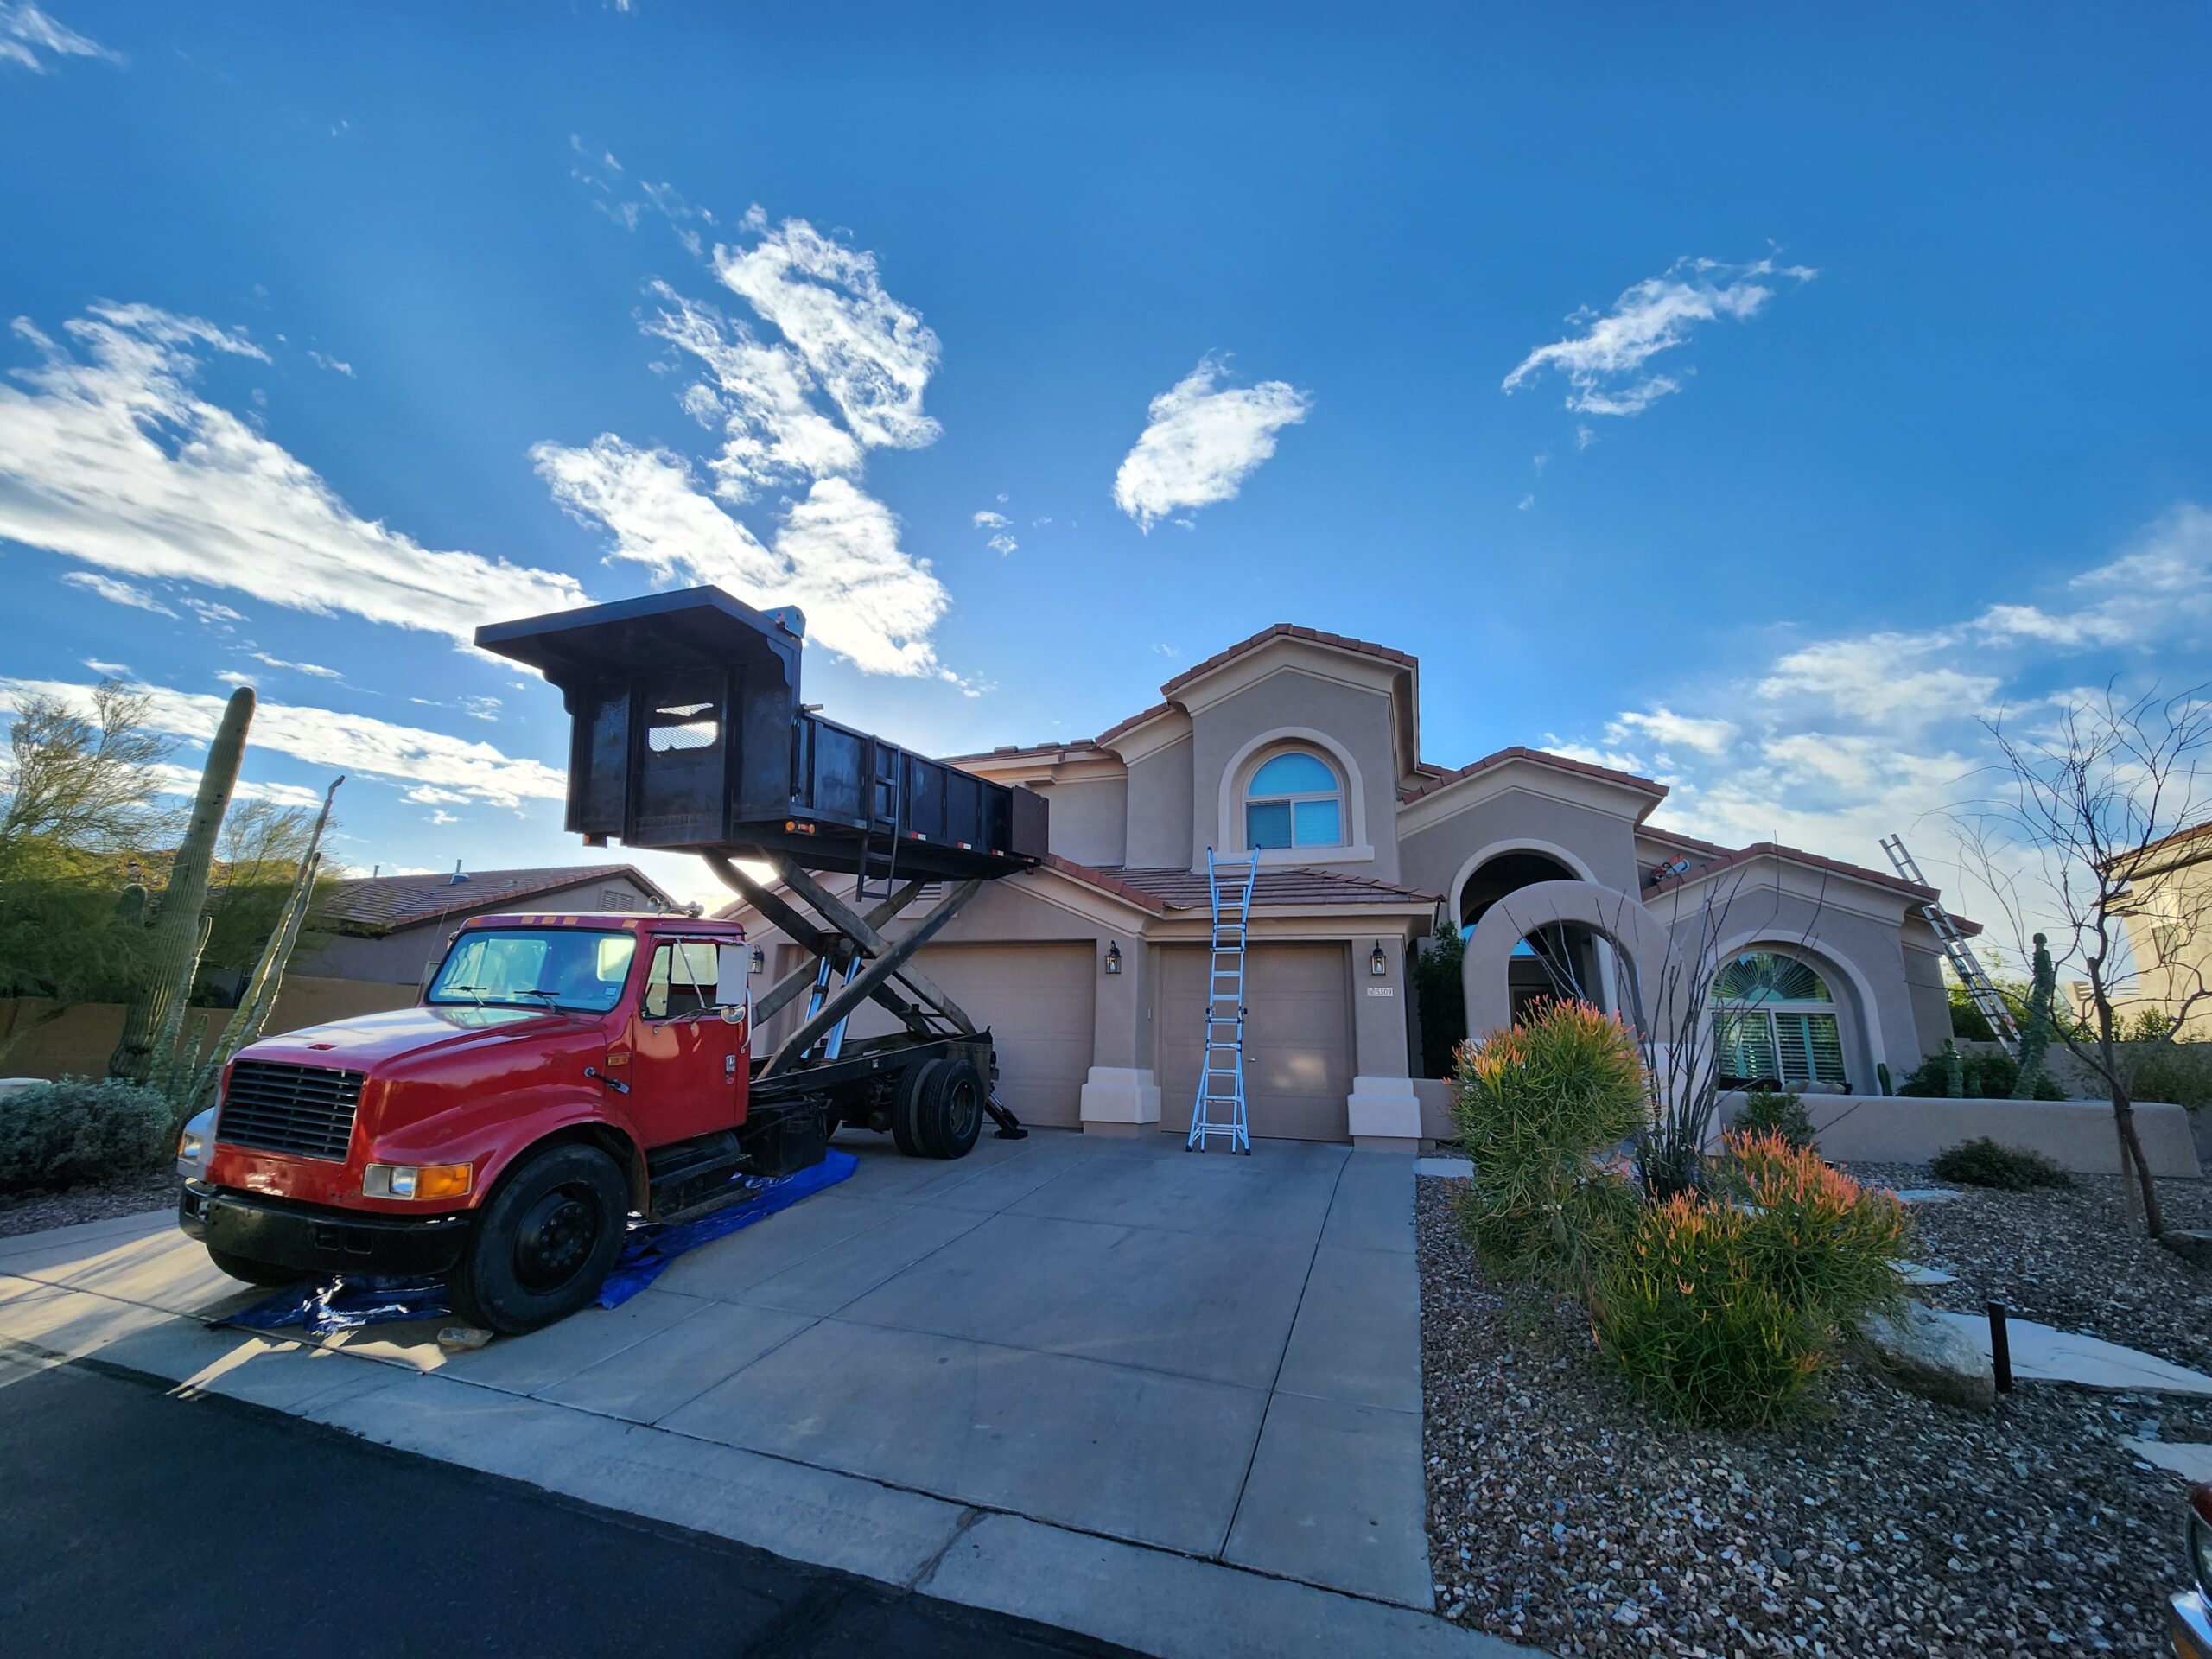 A red dump truck outside home during re roofing in arizona by local contractor Behmer.